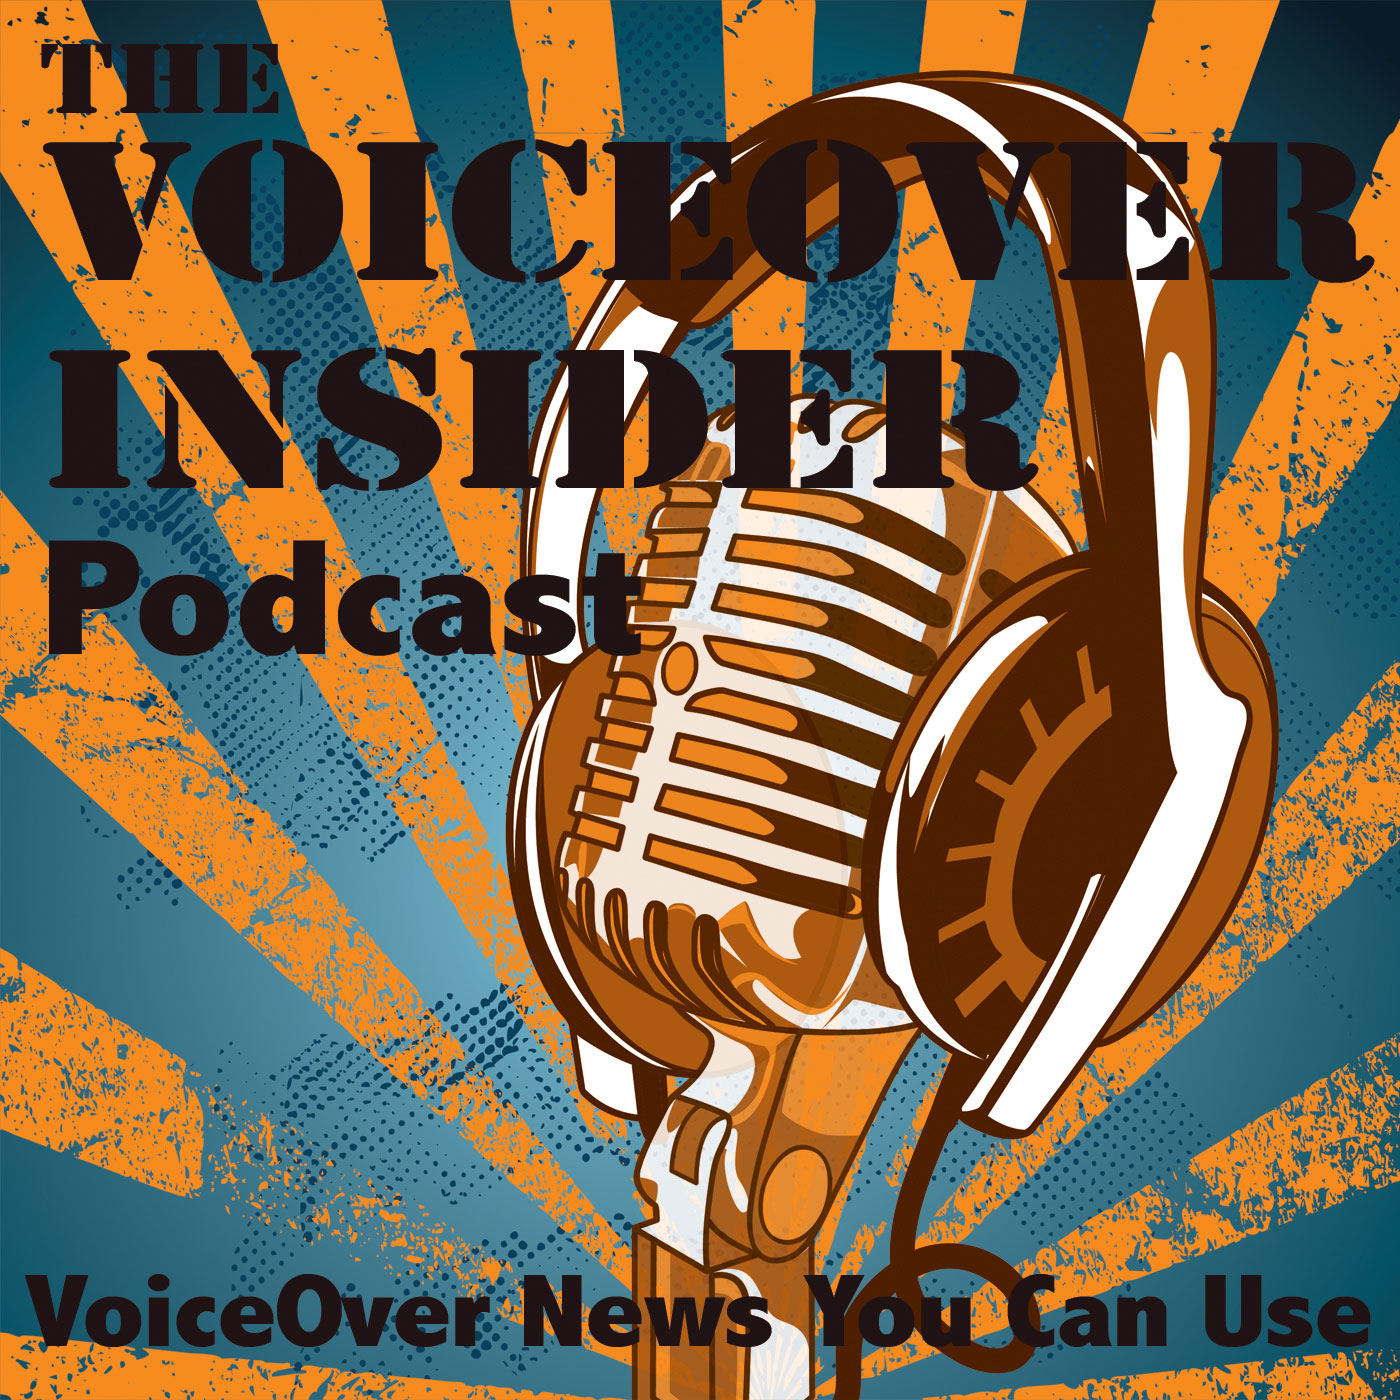 Mike Verret: The VO Elevator Pitch